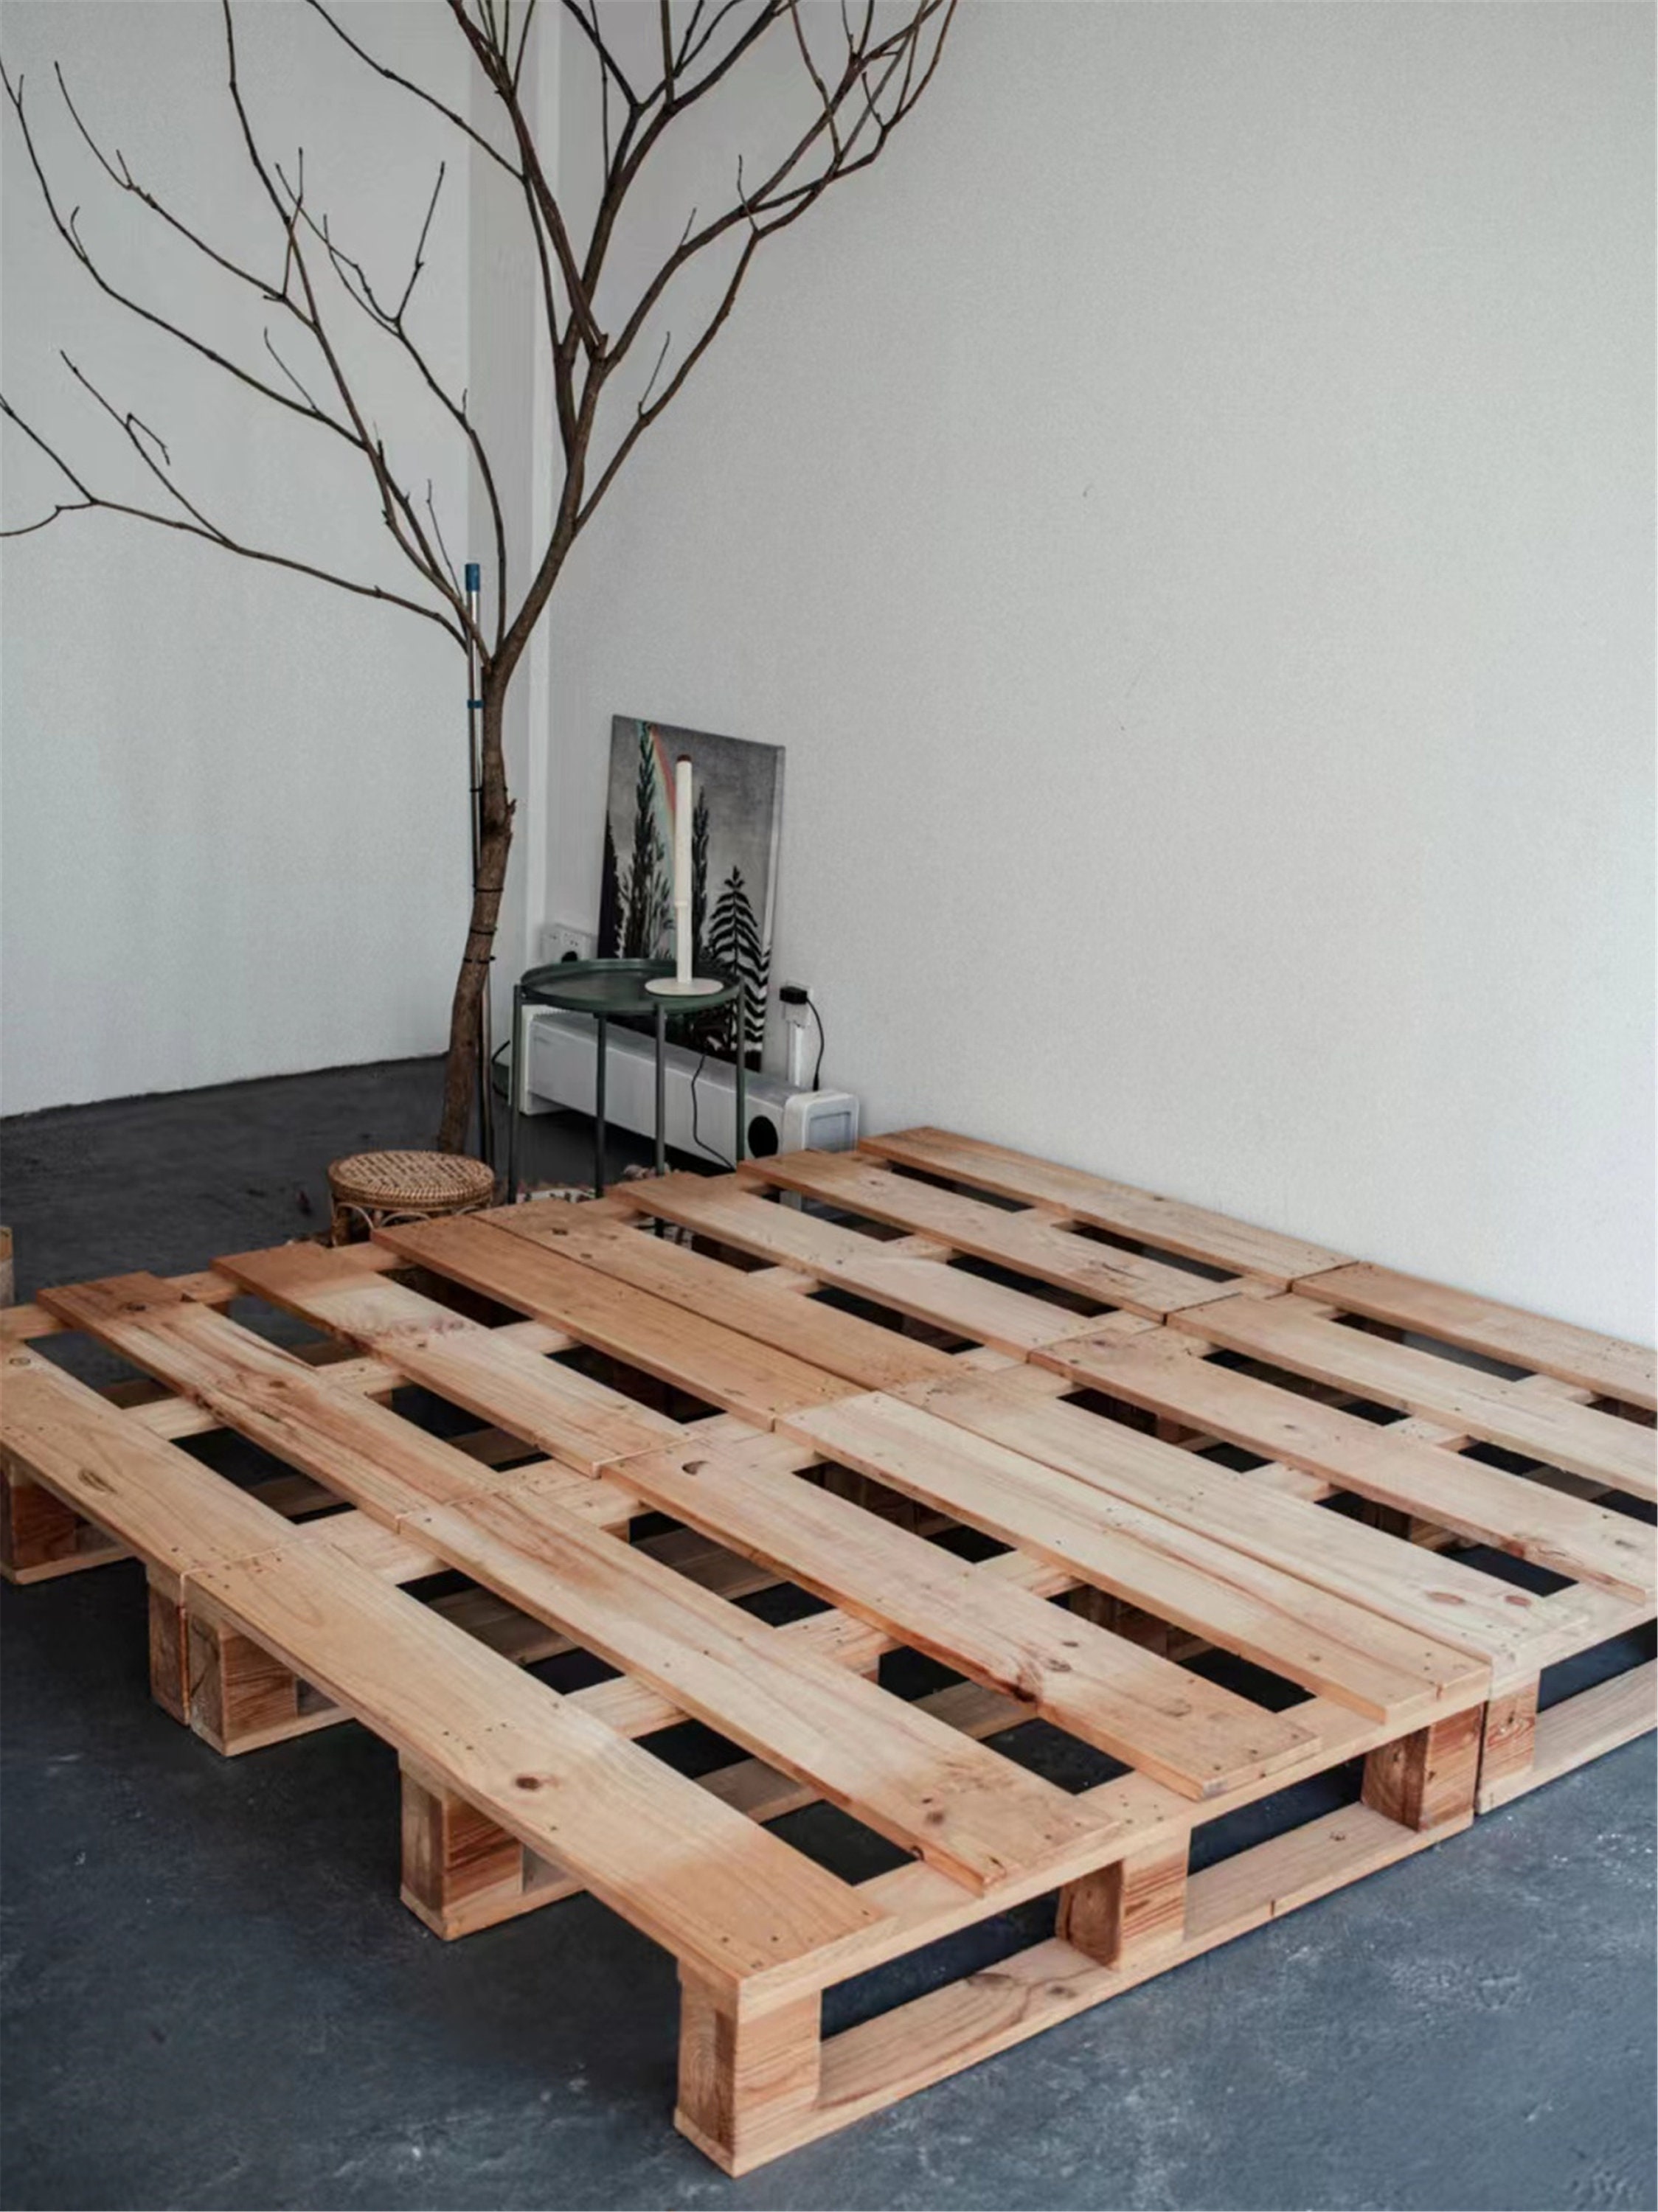 The Oversized Queen Pallet Bed - Designed for Queen size mattress – Pallet  Beds